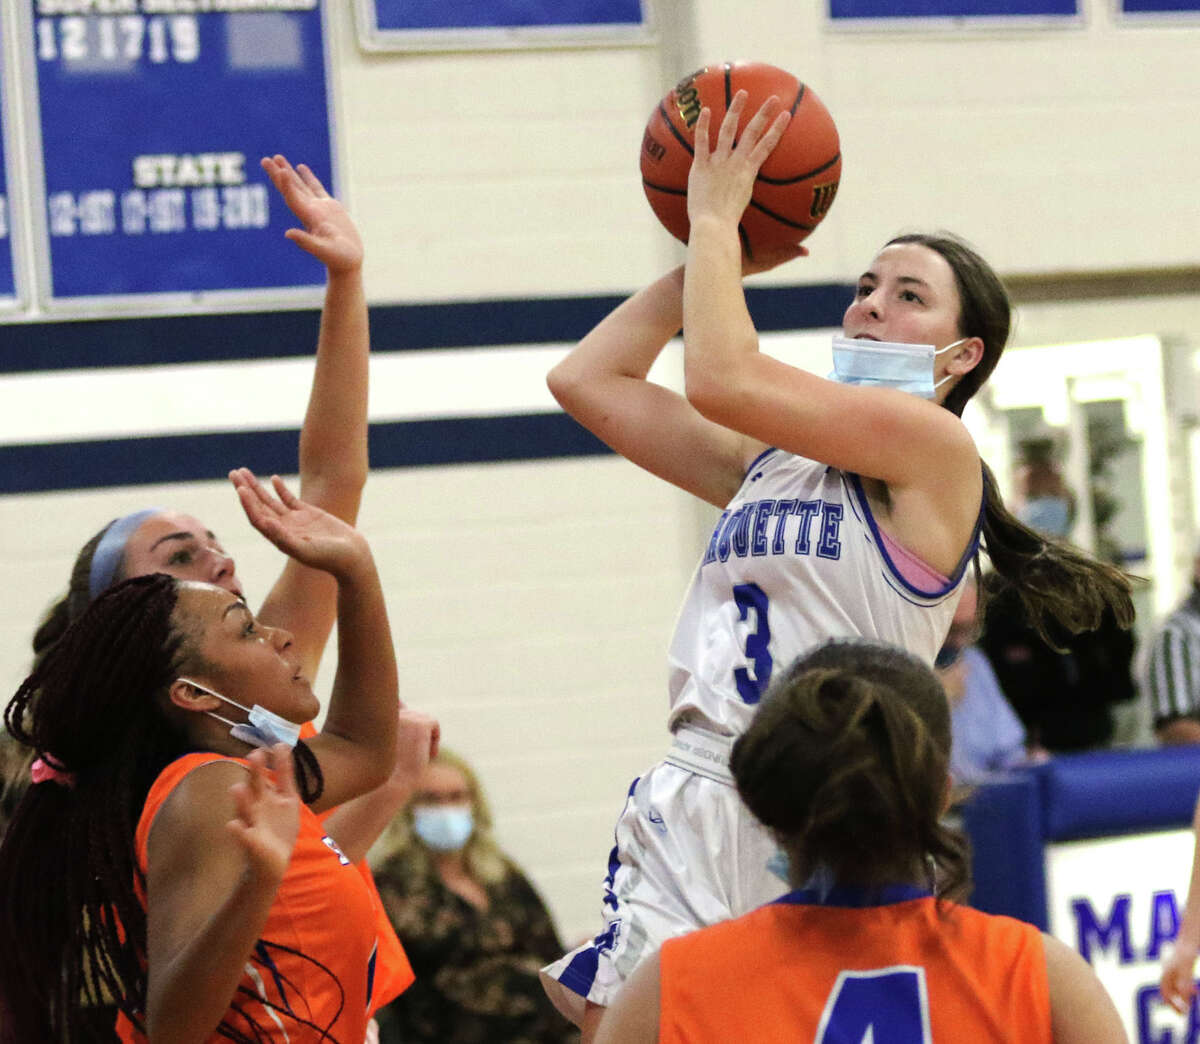 Marquette's Kamryn Fandrey (3) puts up a shot in the lane against Decatur St. Teresa on Saturday afternoon in Alton.